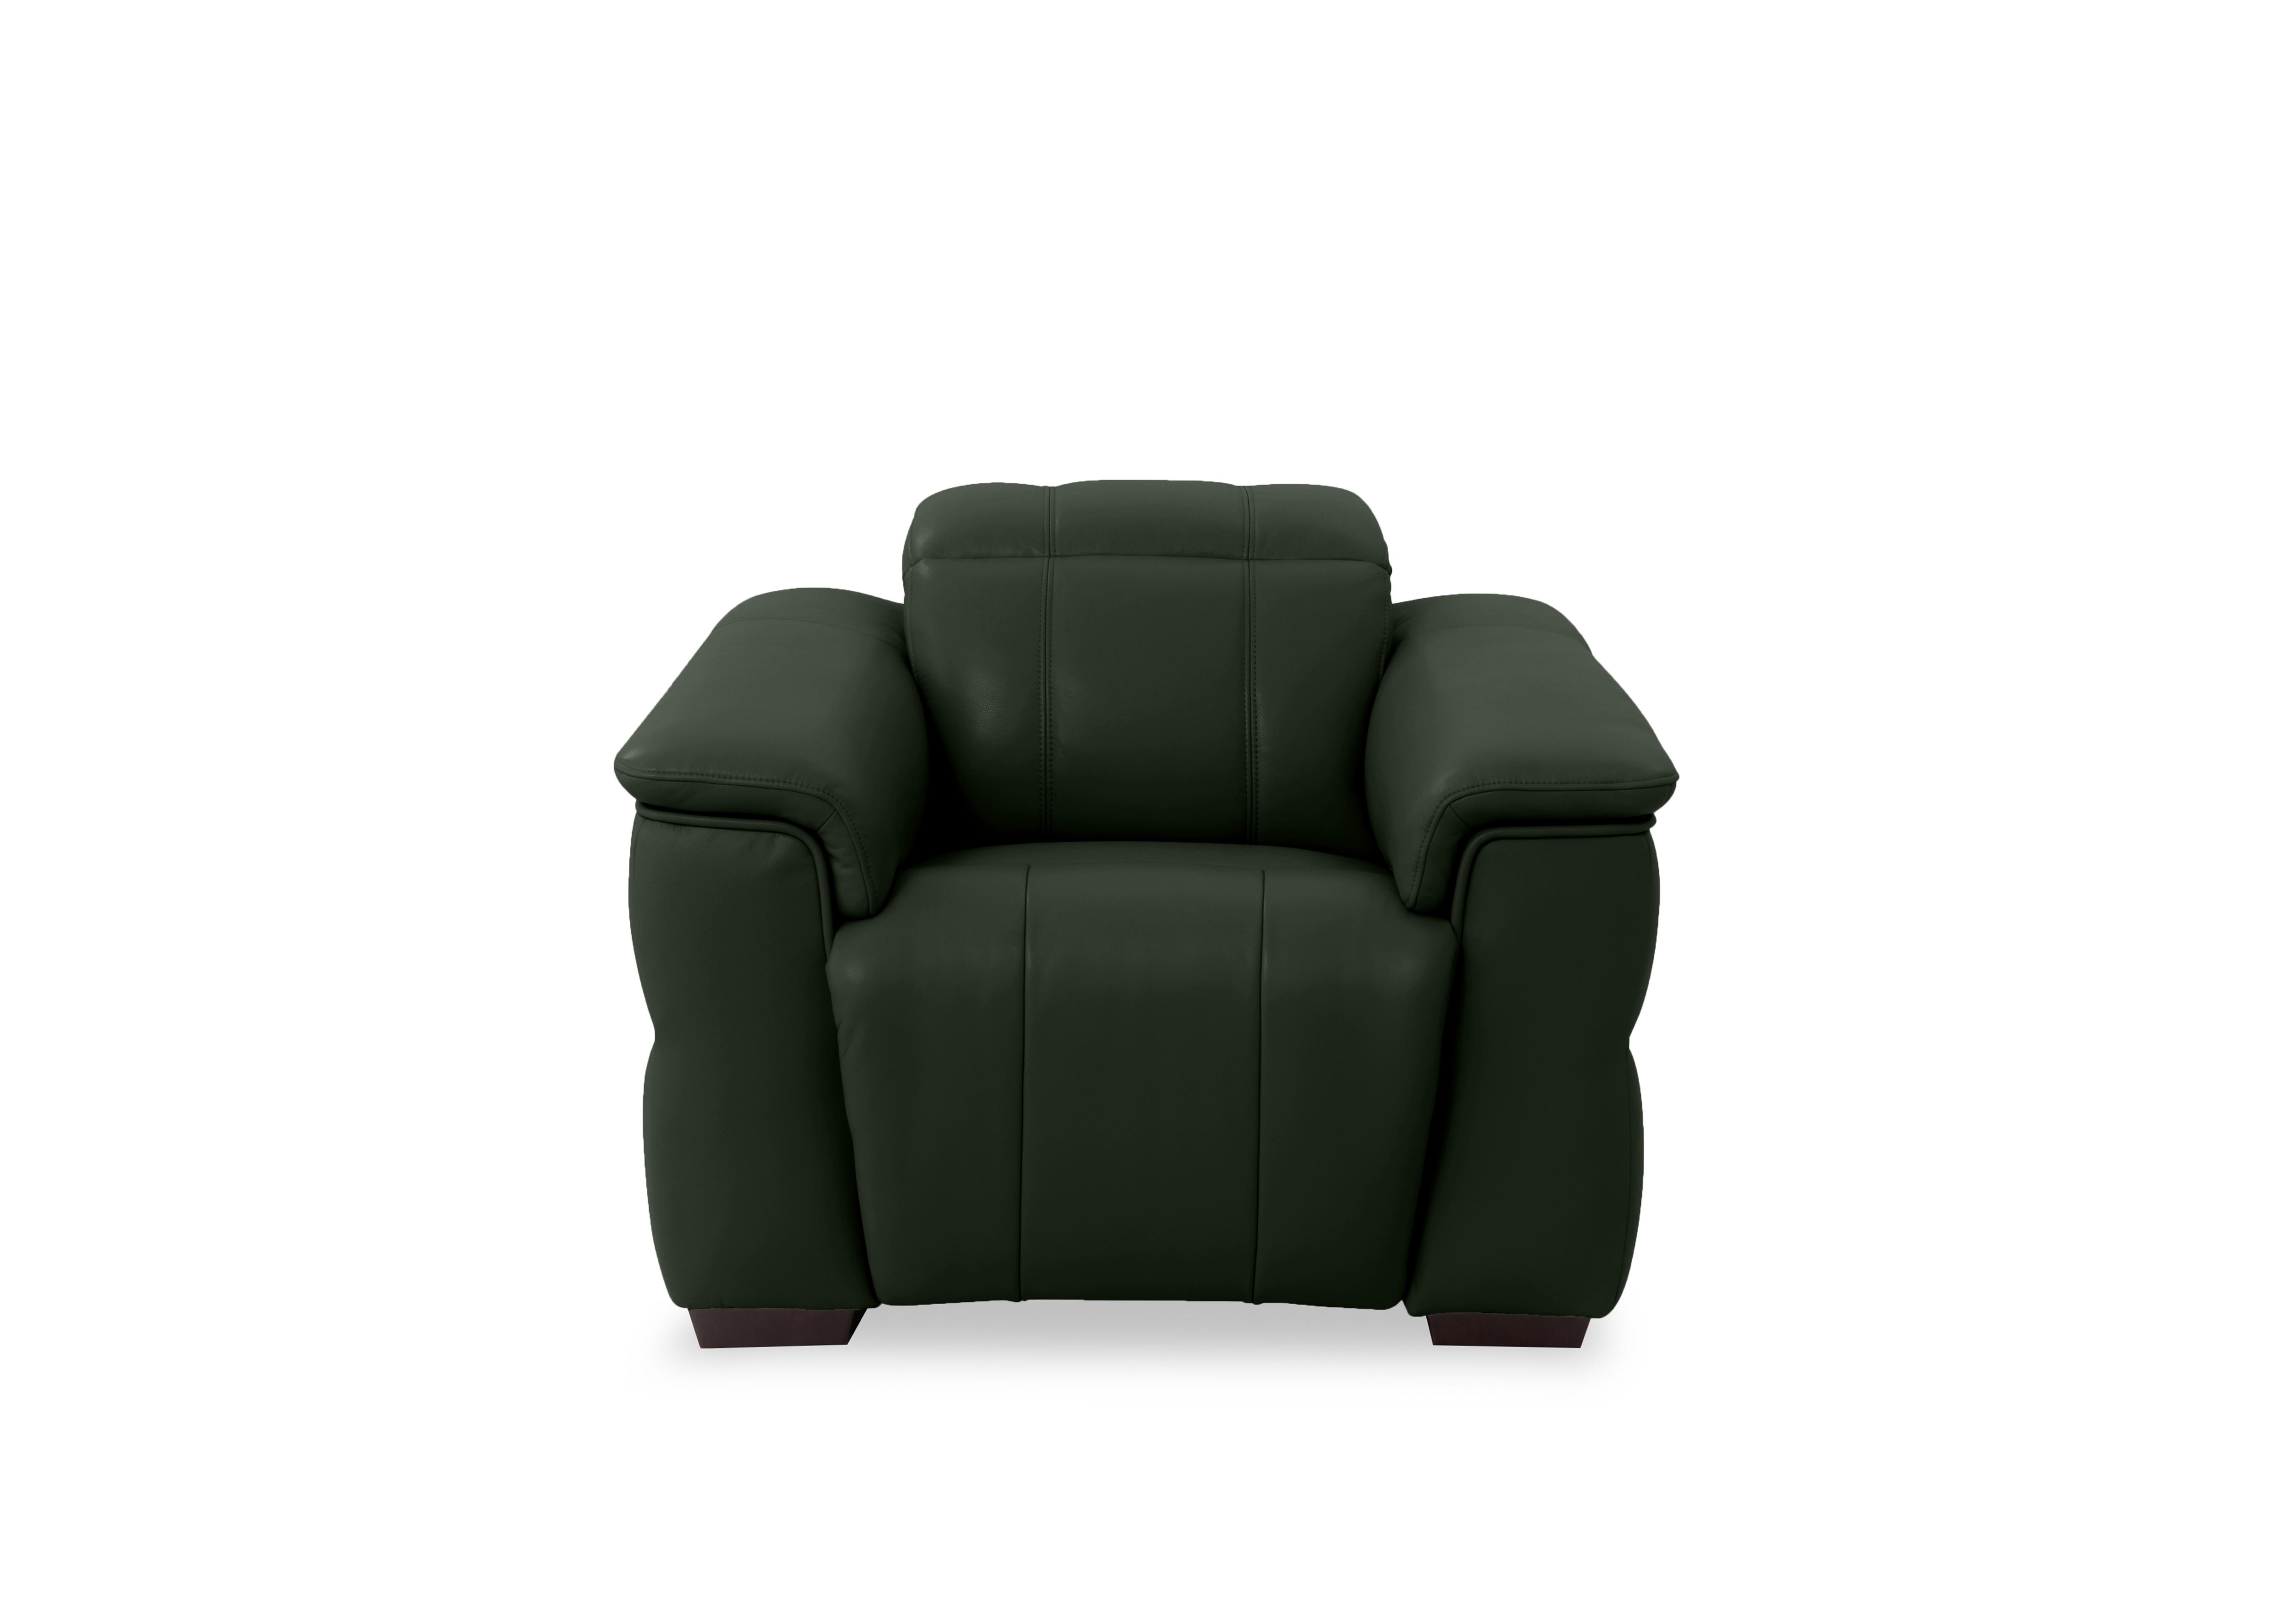 Inca Leather Power Recliner Chair with Power Headrest in Cat-40/10 Oslo Pine on Furniture Village